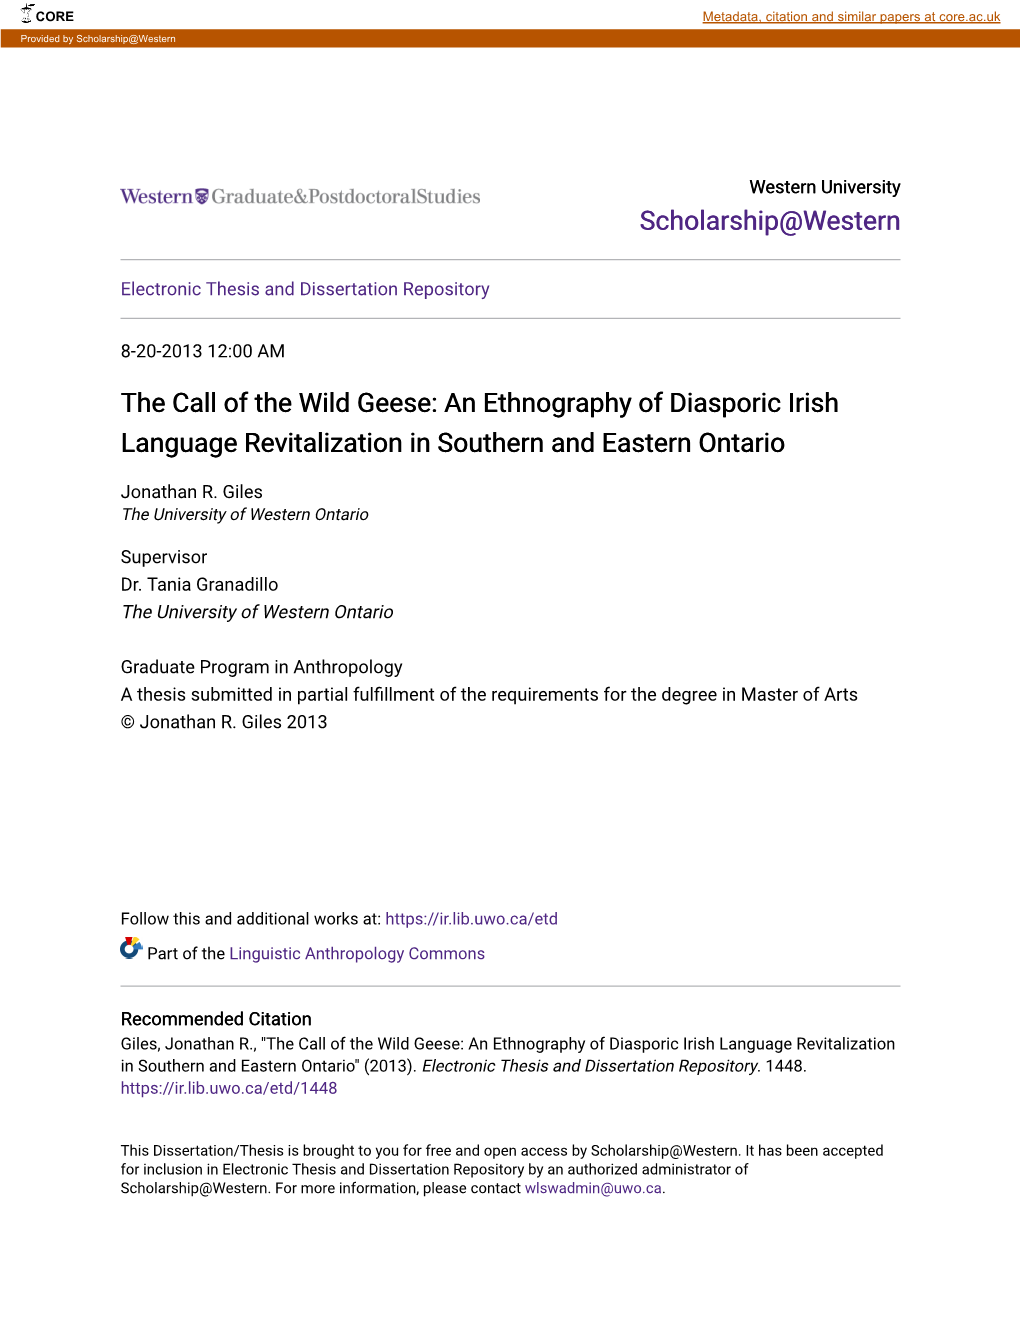 The Call of the Wild Geese: an Ethnography of Diasporic Irish Language Revitalization in Southern and Eastern Ontario